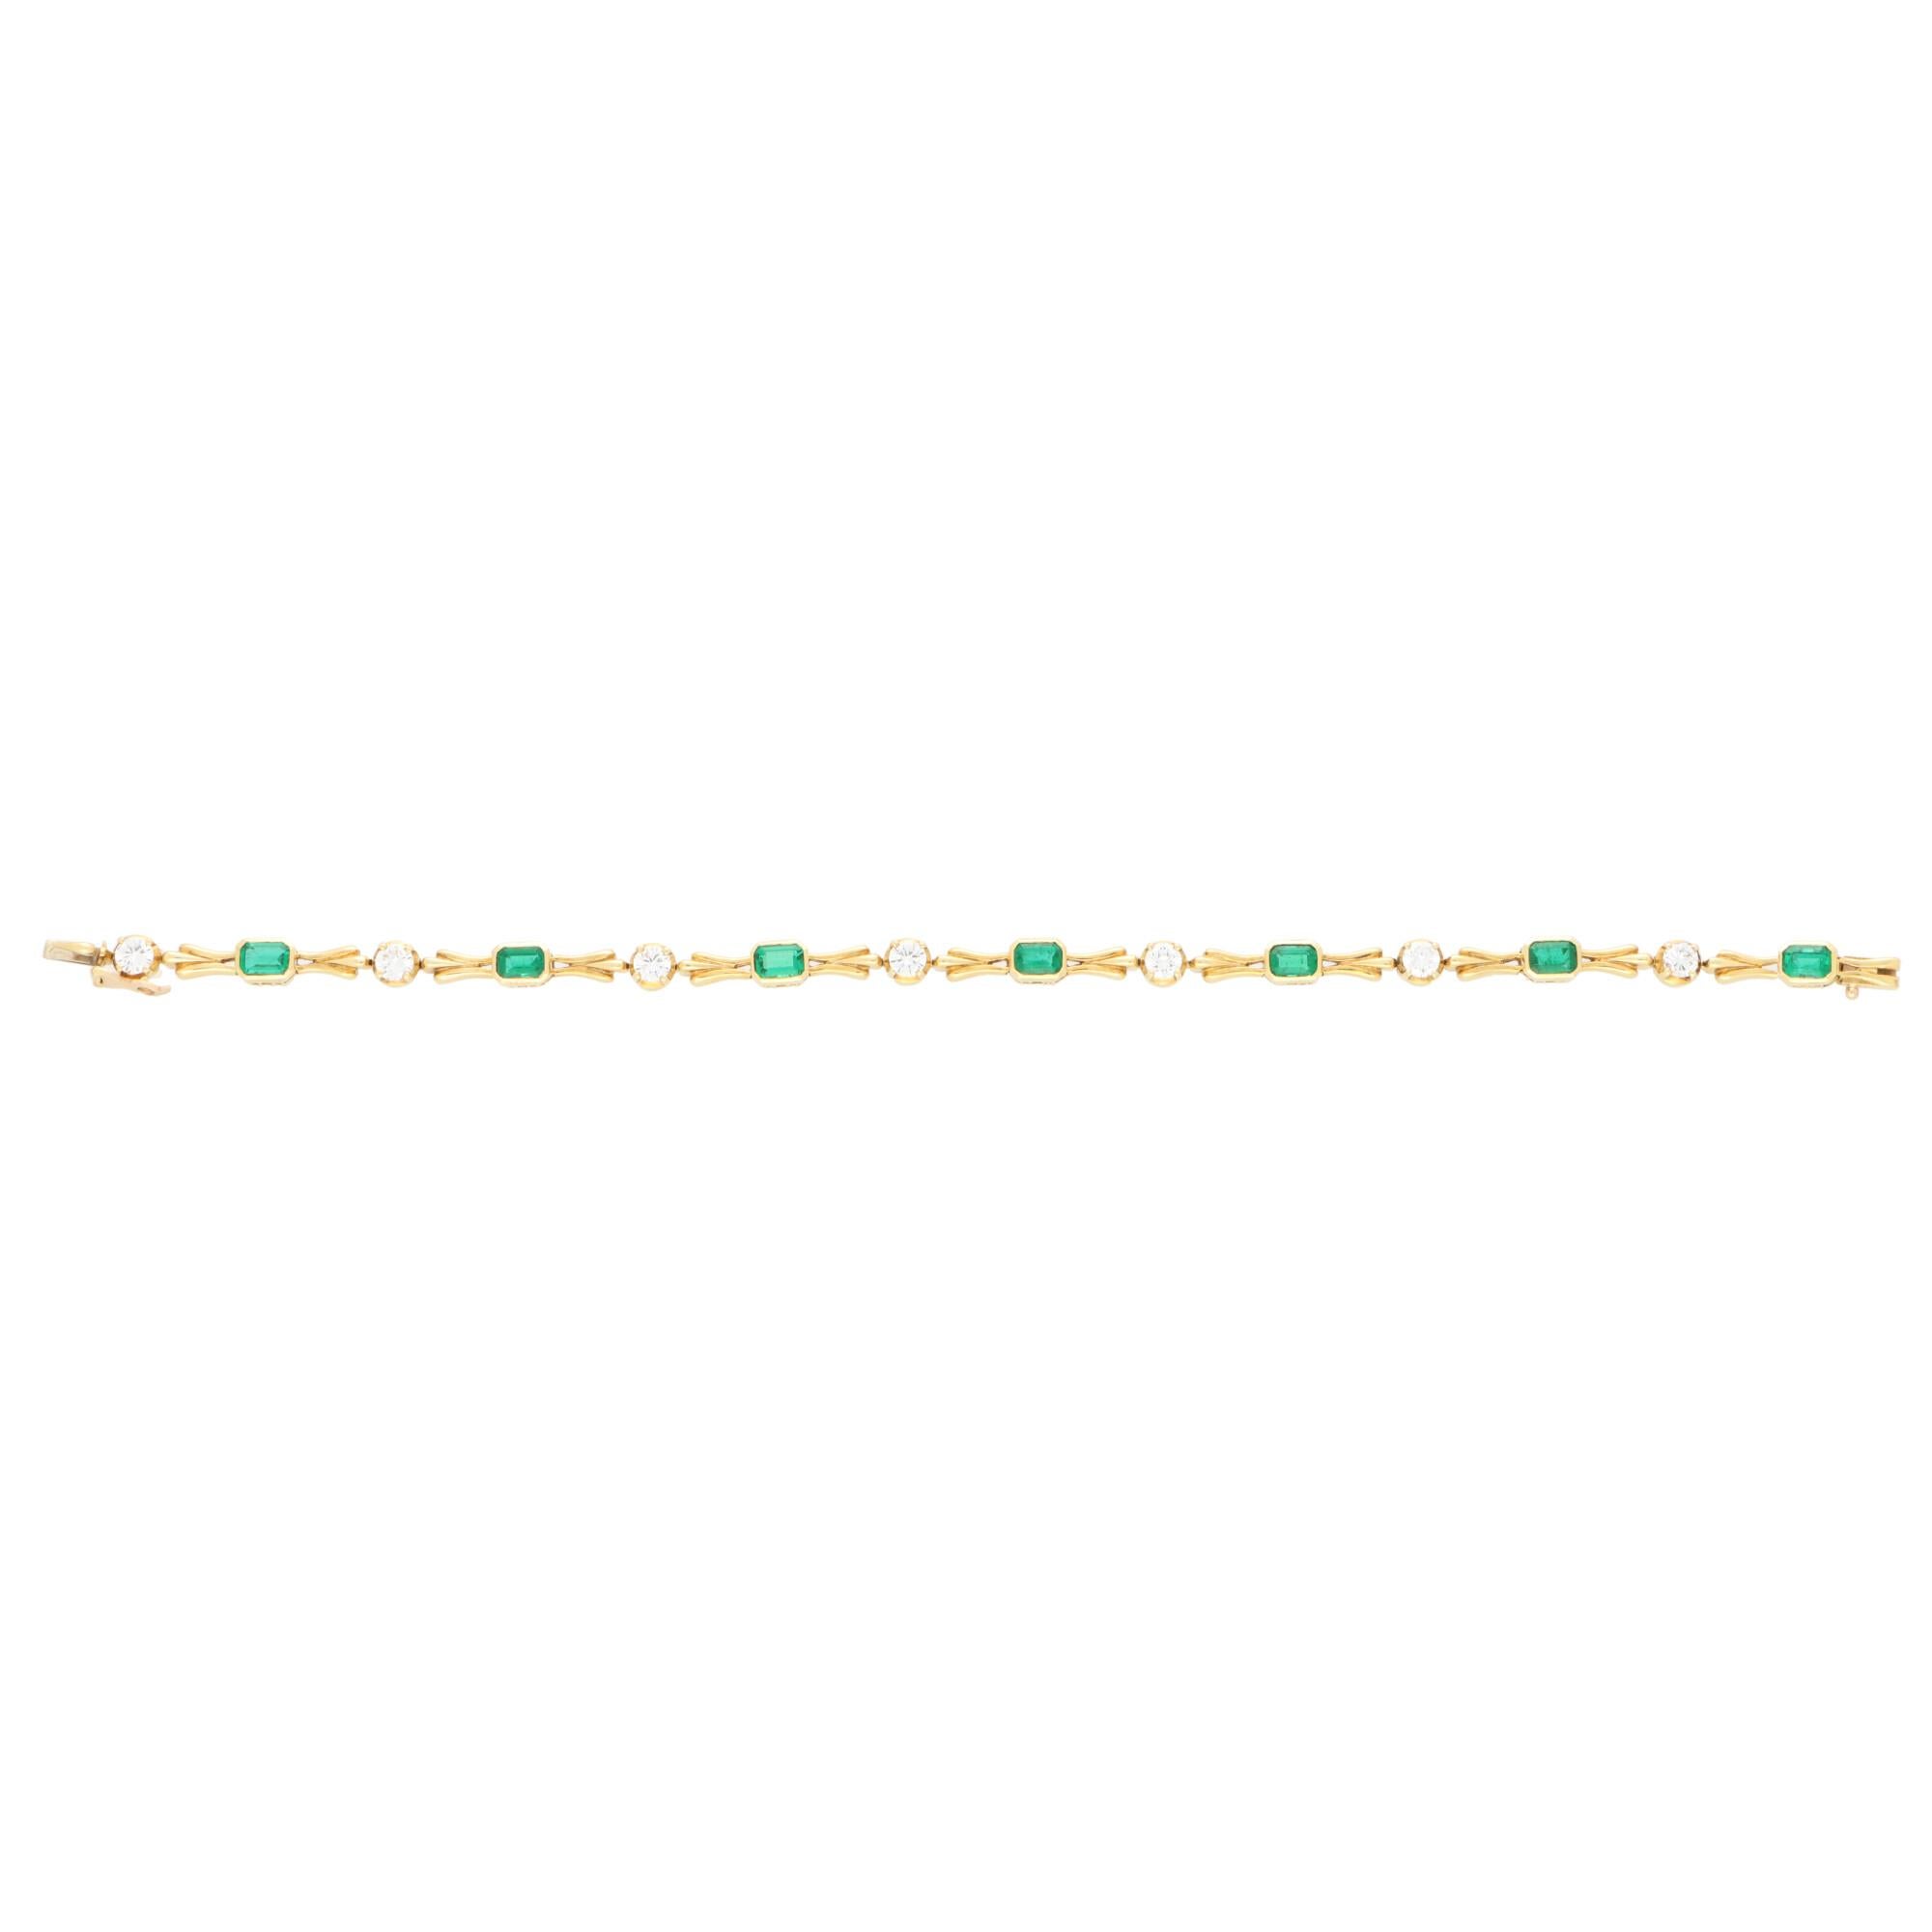 Emerald Cut Vintage Boodles Emerald and Diamond Bracelet Set in 18k Yellow Gold